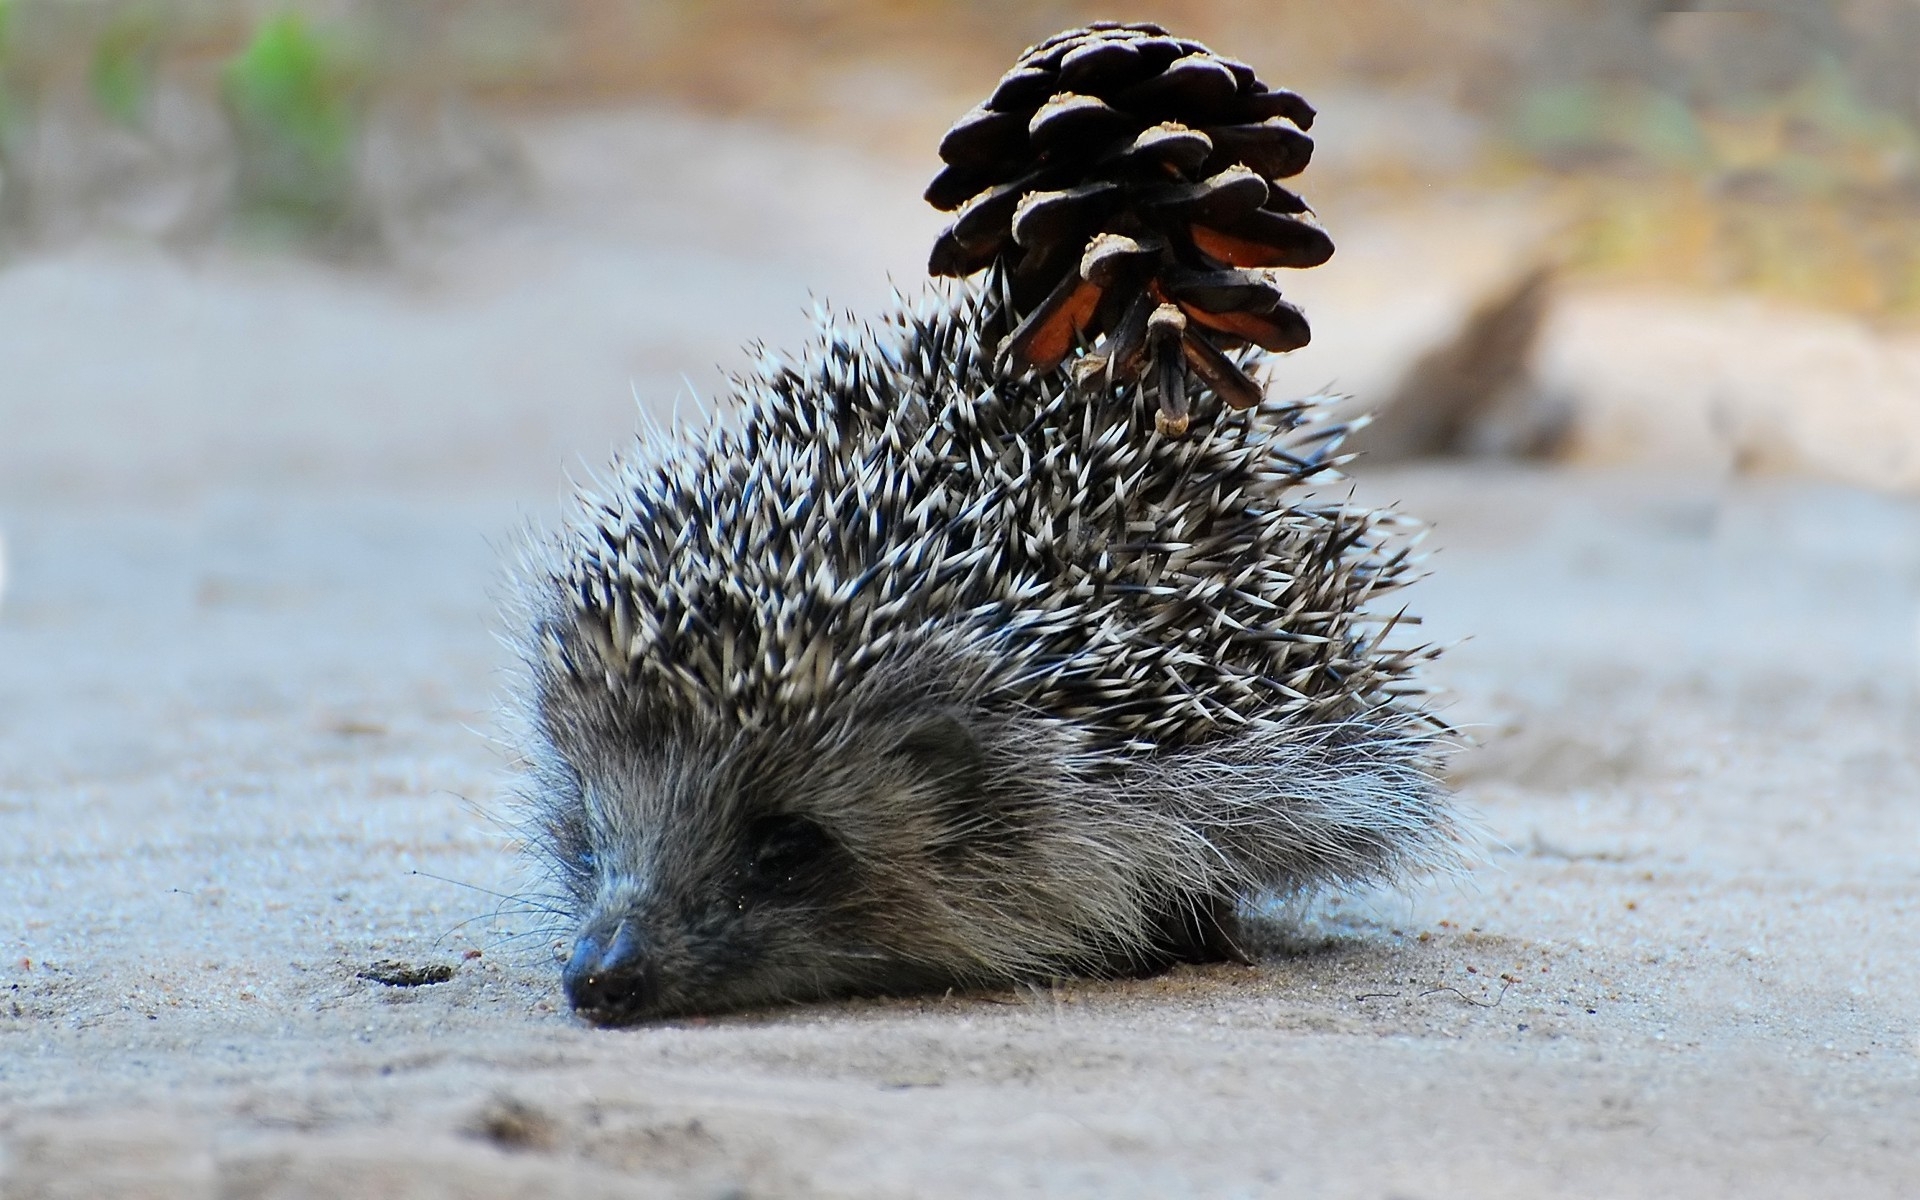 33828 download wallpaper animals, hedgehogs screensavers and pictures for free